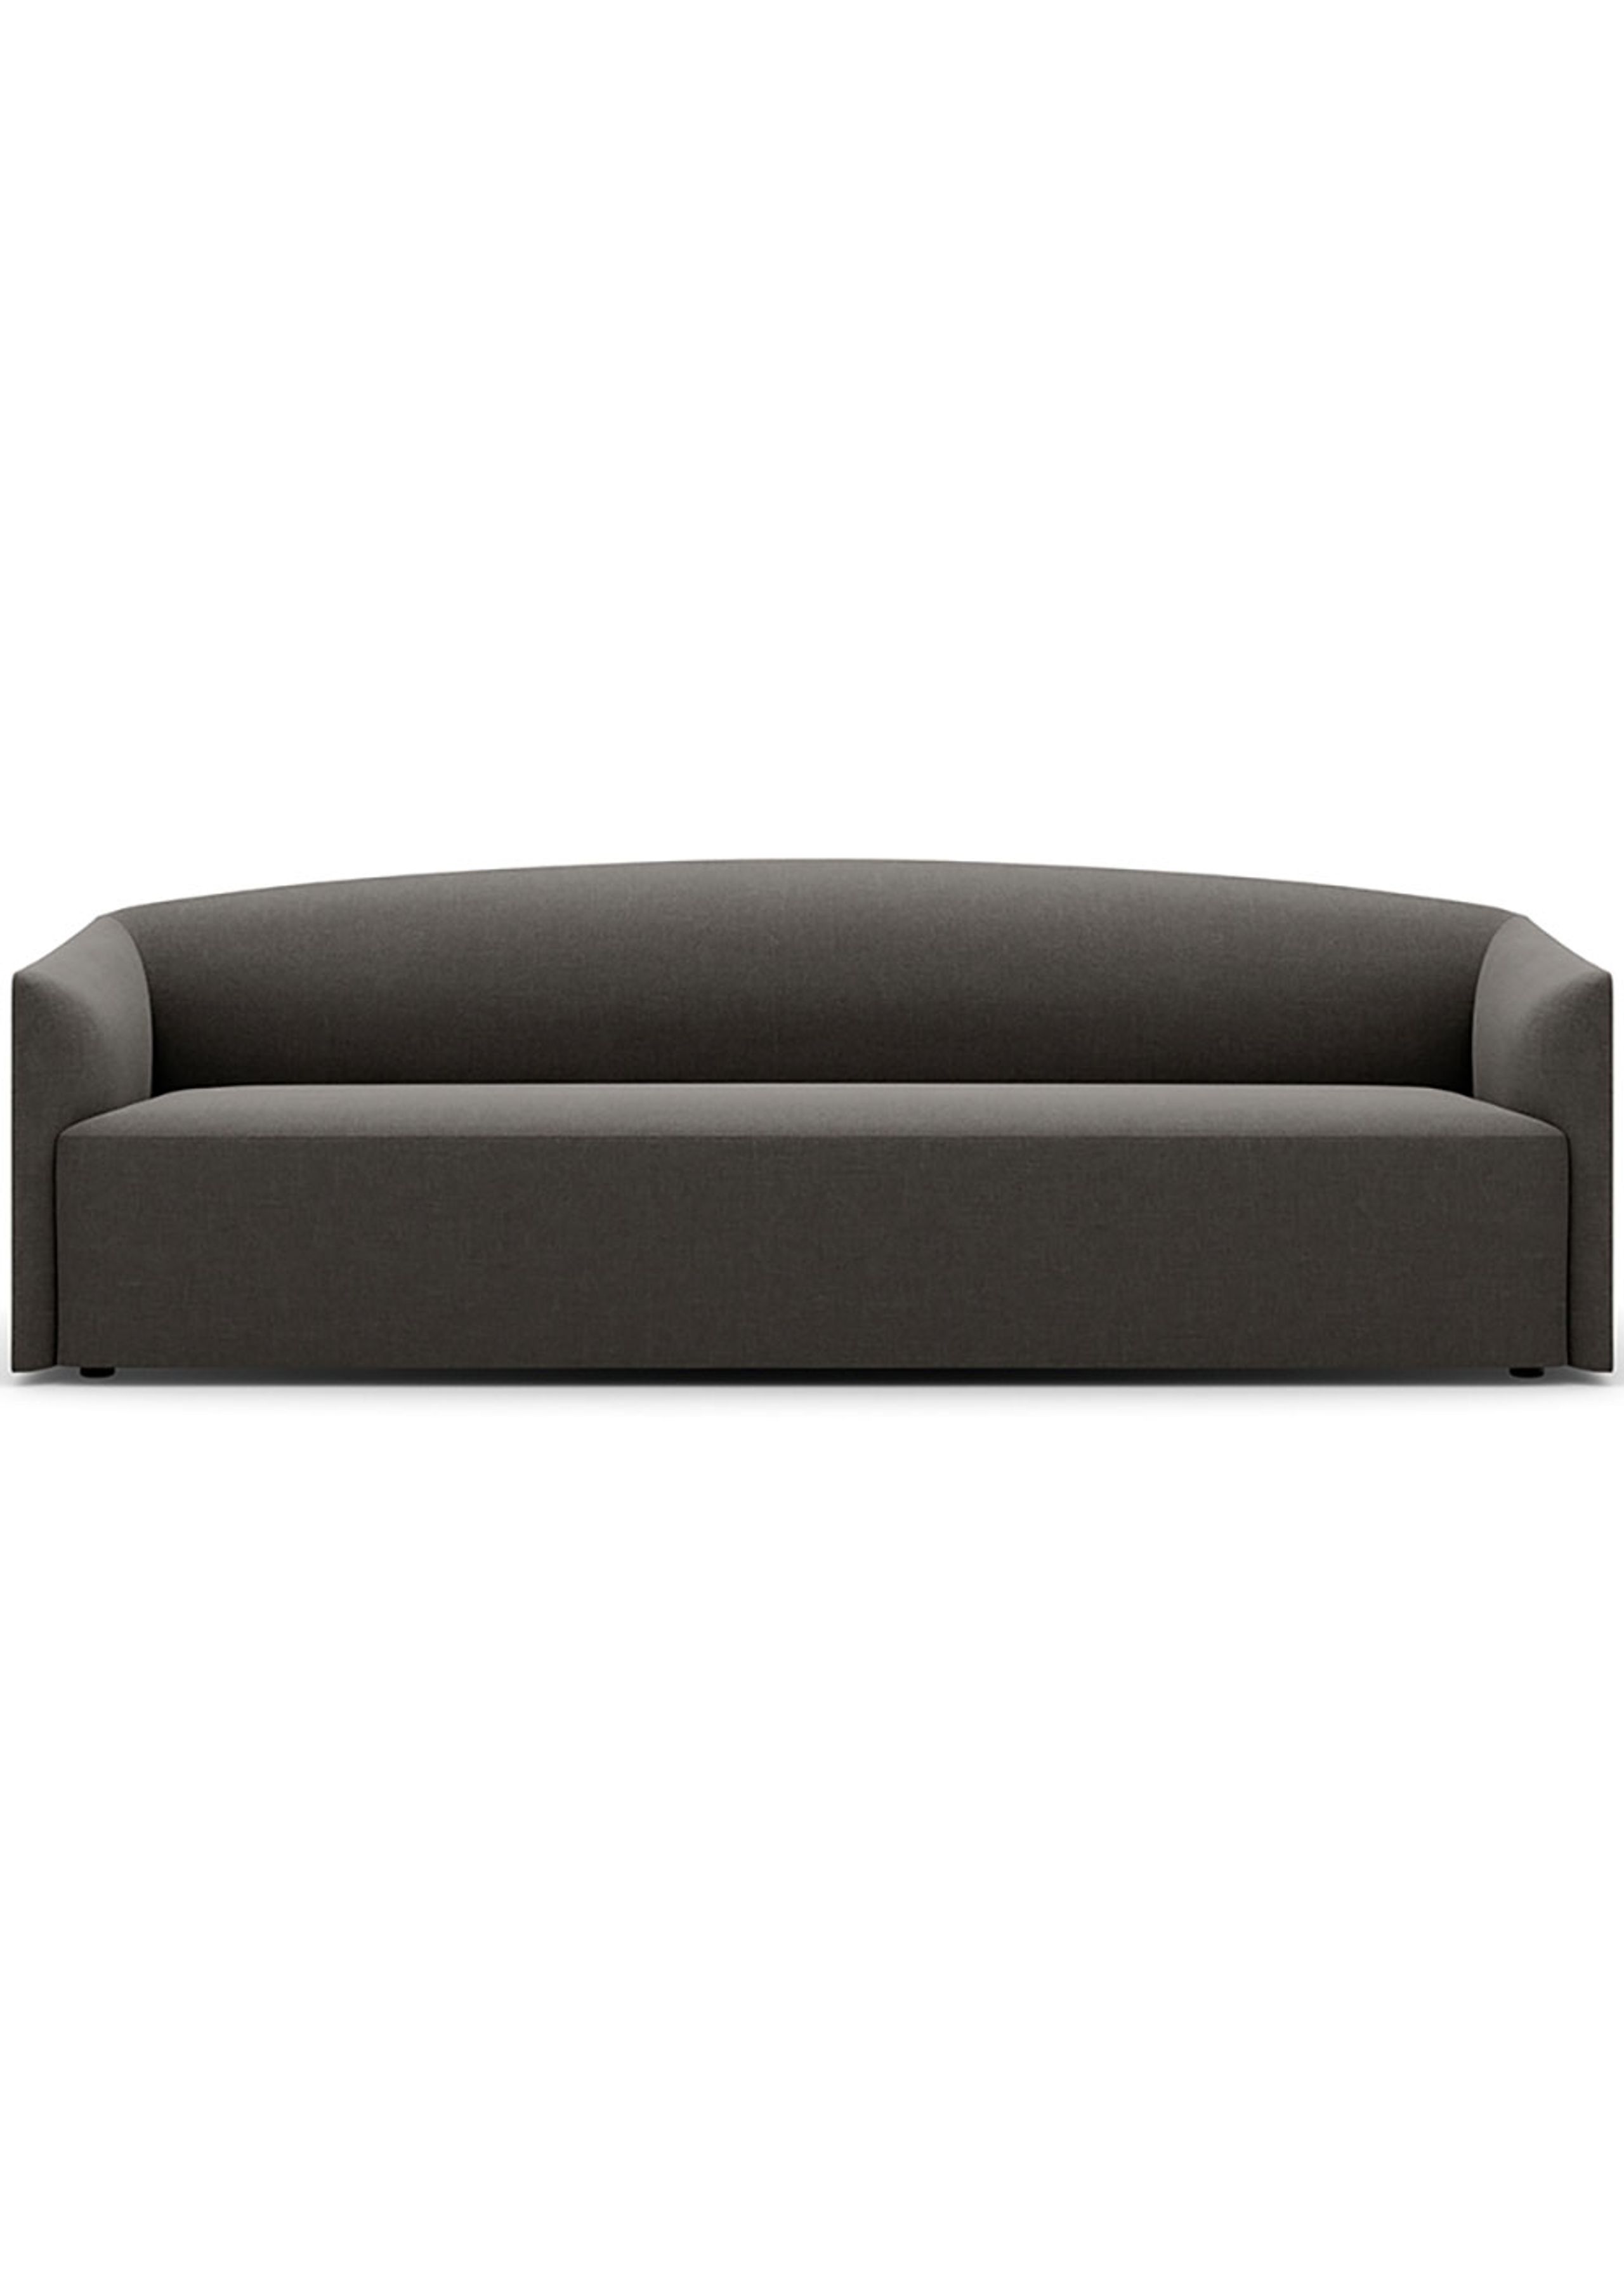 Shore Sofa 3 Seater Extended Base - Divano per 3 persone - New Works